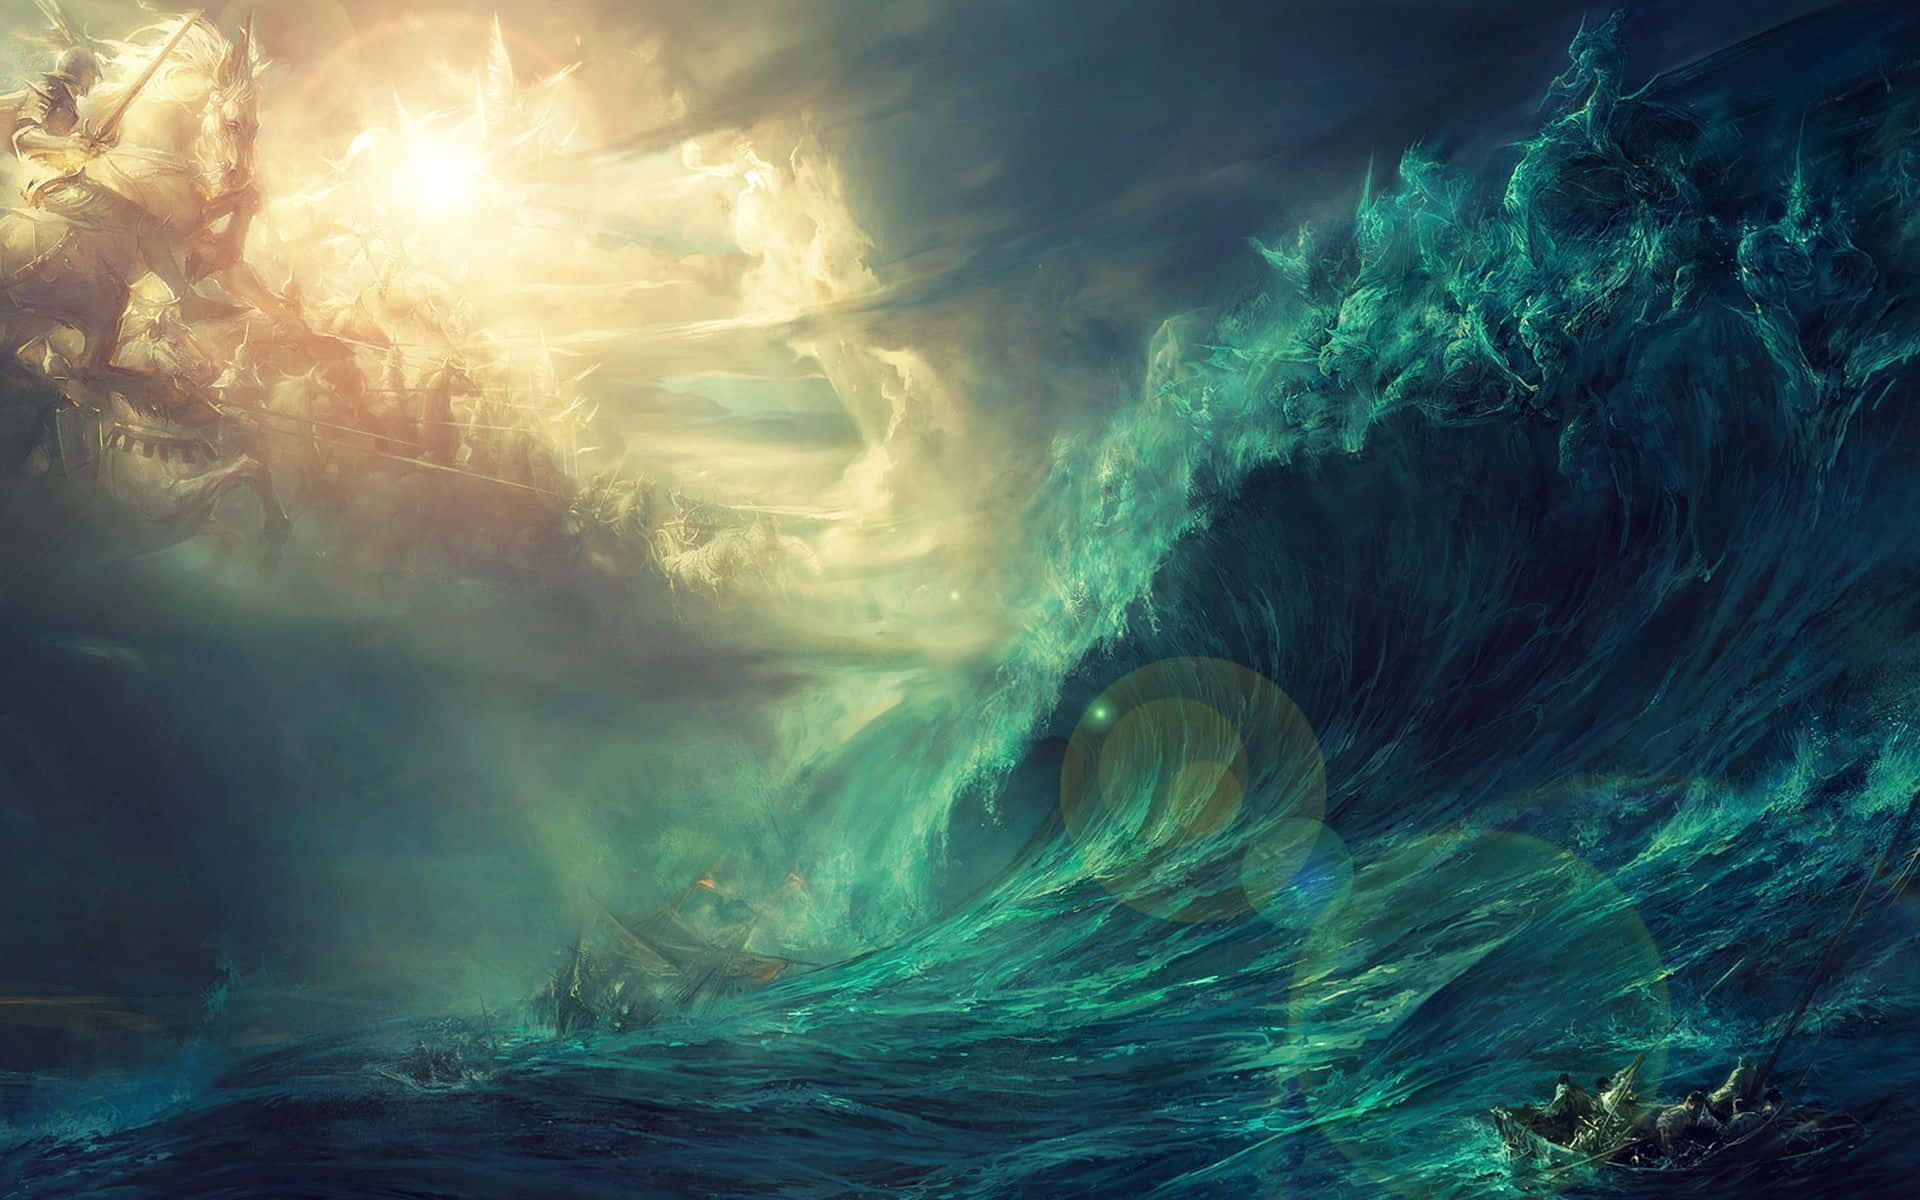 Awestruck by the majesty of the ocean storm. Wallpaper